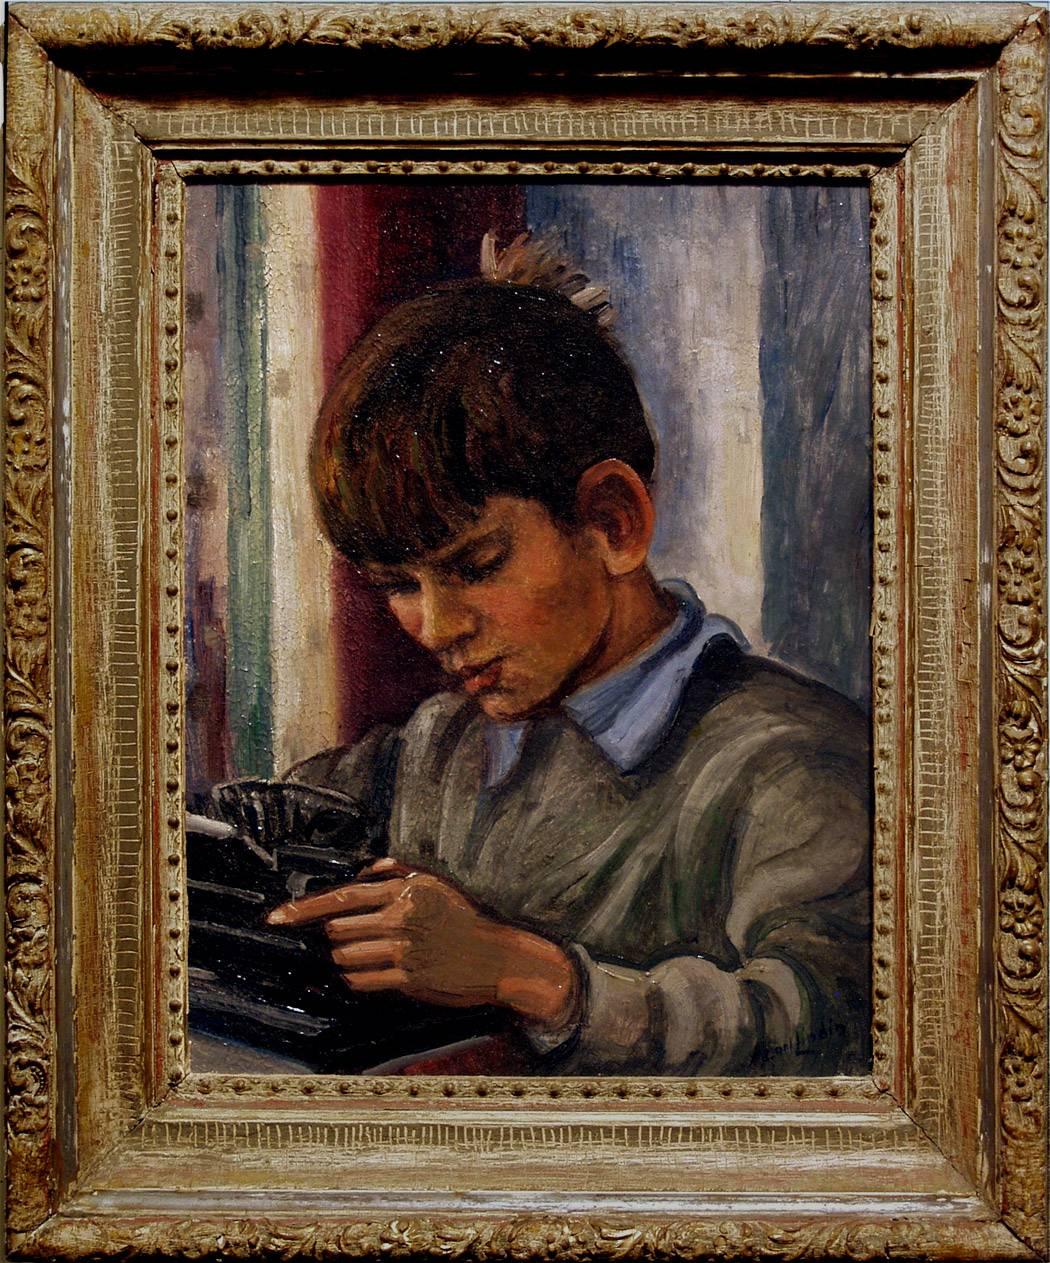 Carl Lindin Portrait Painting - Portrait of a Boy at a Typewriter Untitled Oil Painting Interior Genre Scene